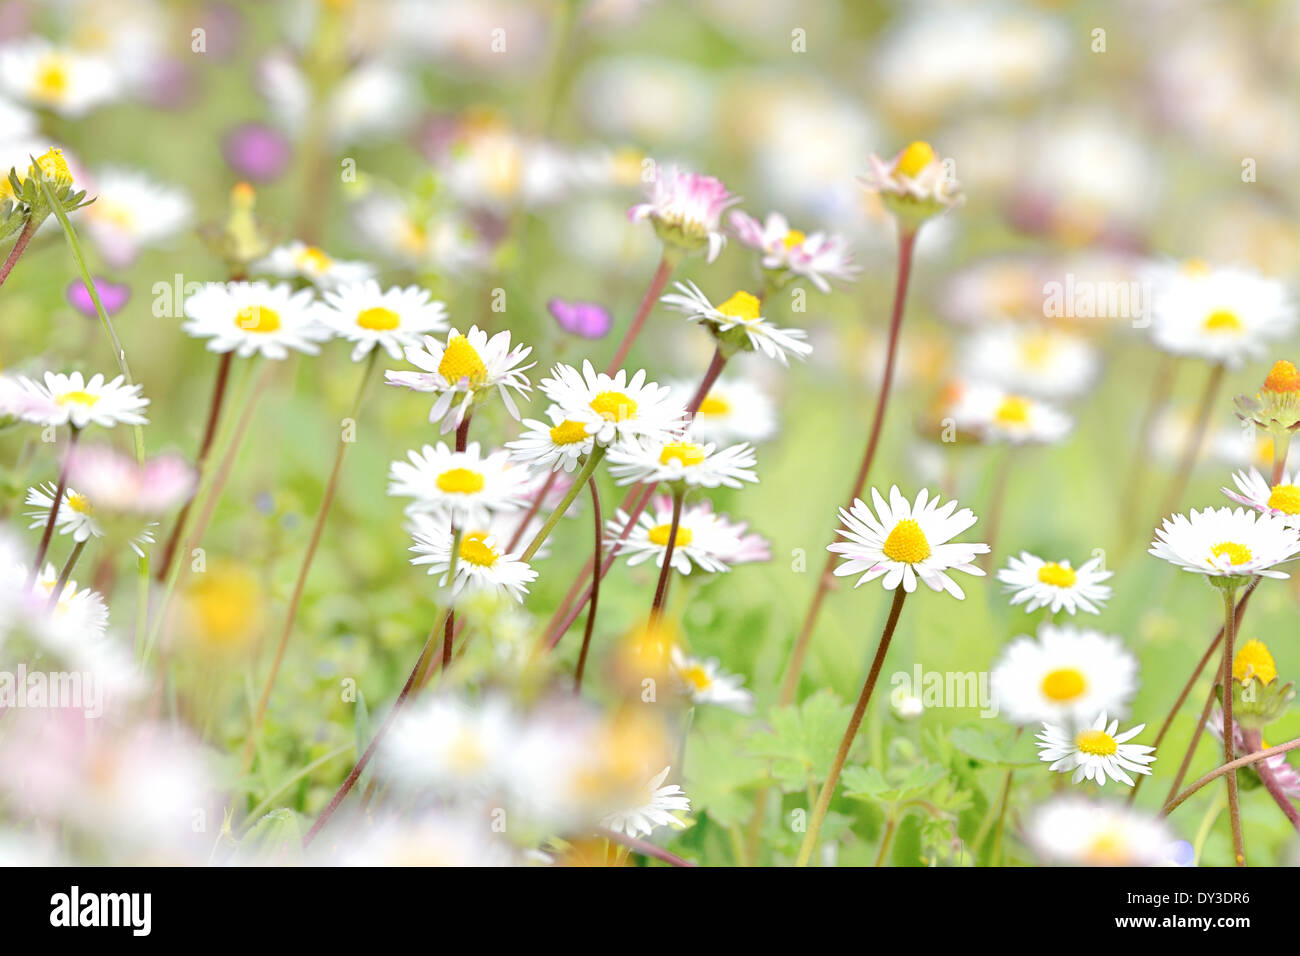 daisies in a lawn Stock Photo